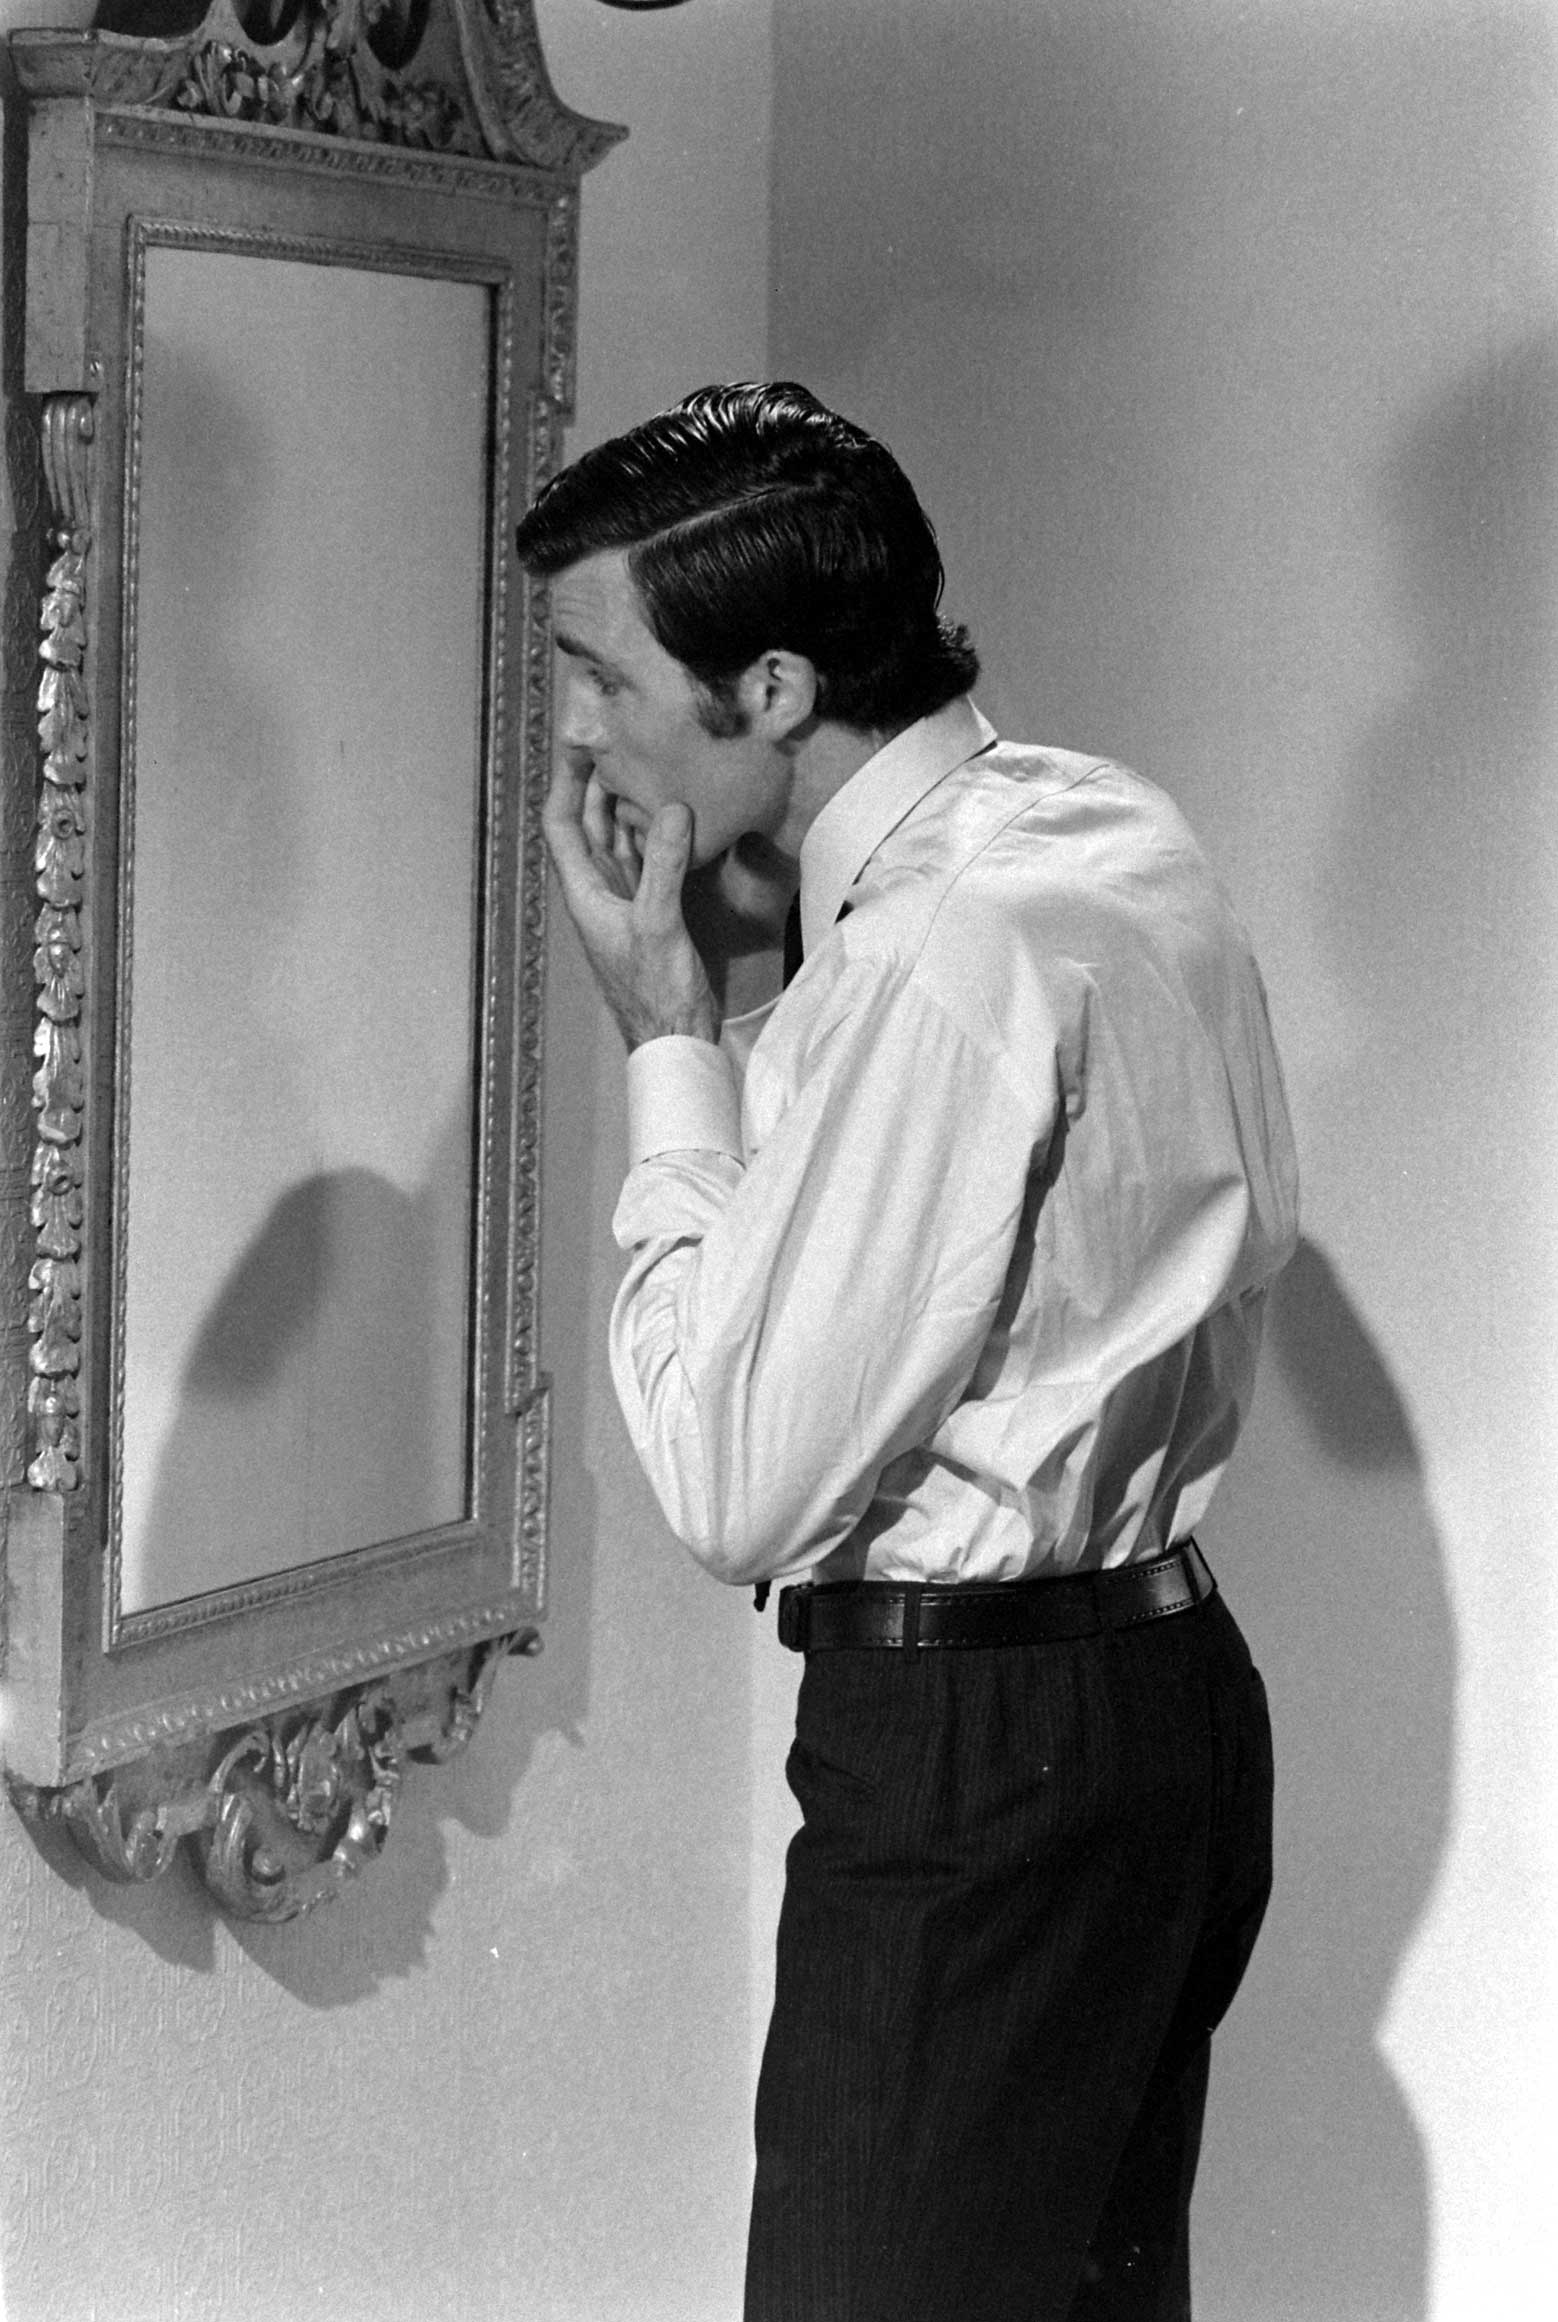 Robert Campbell looks in the mirror between filming scenes for his James Bond audition, 1967.